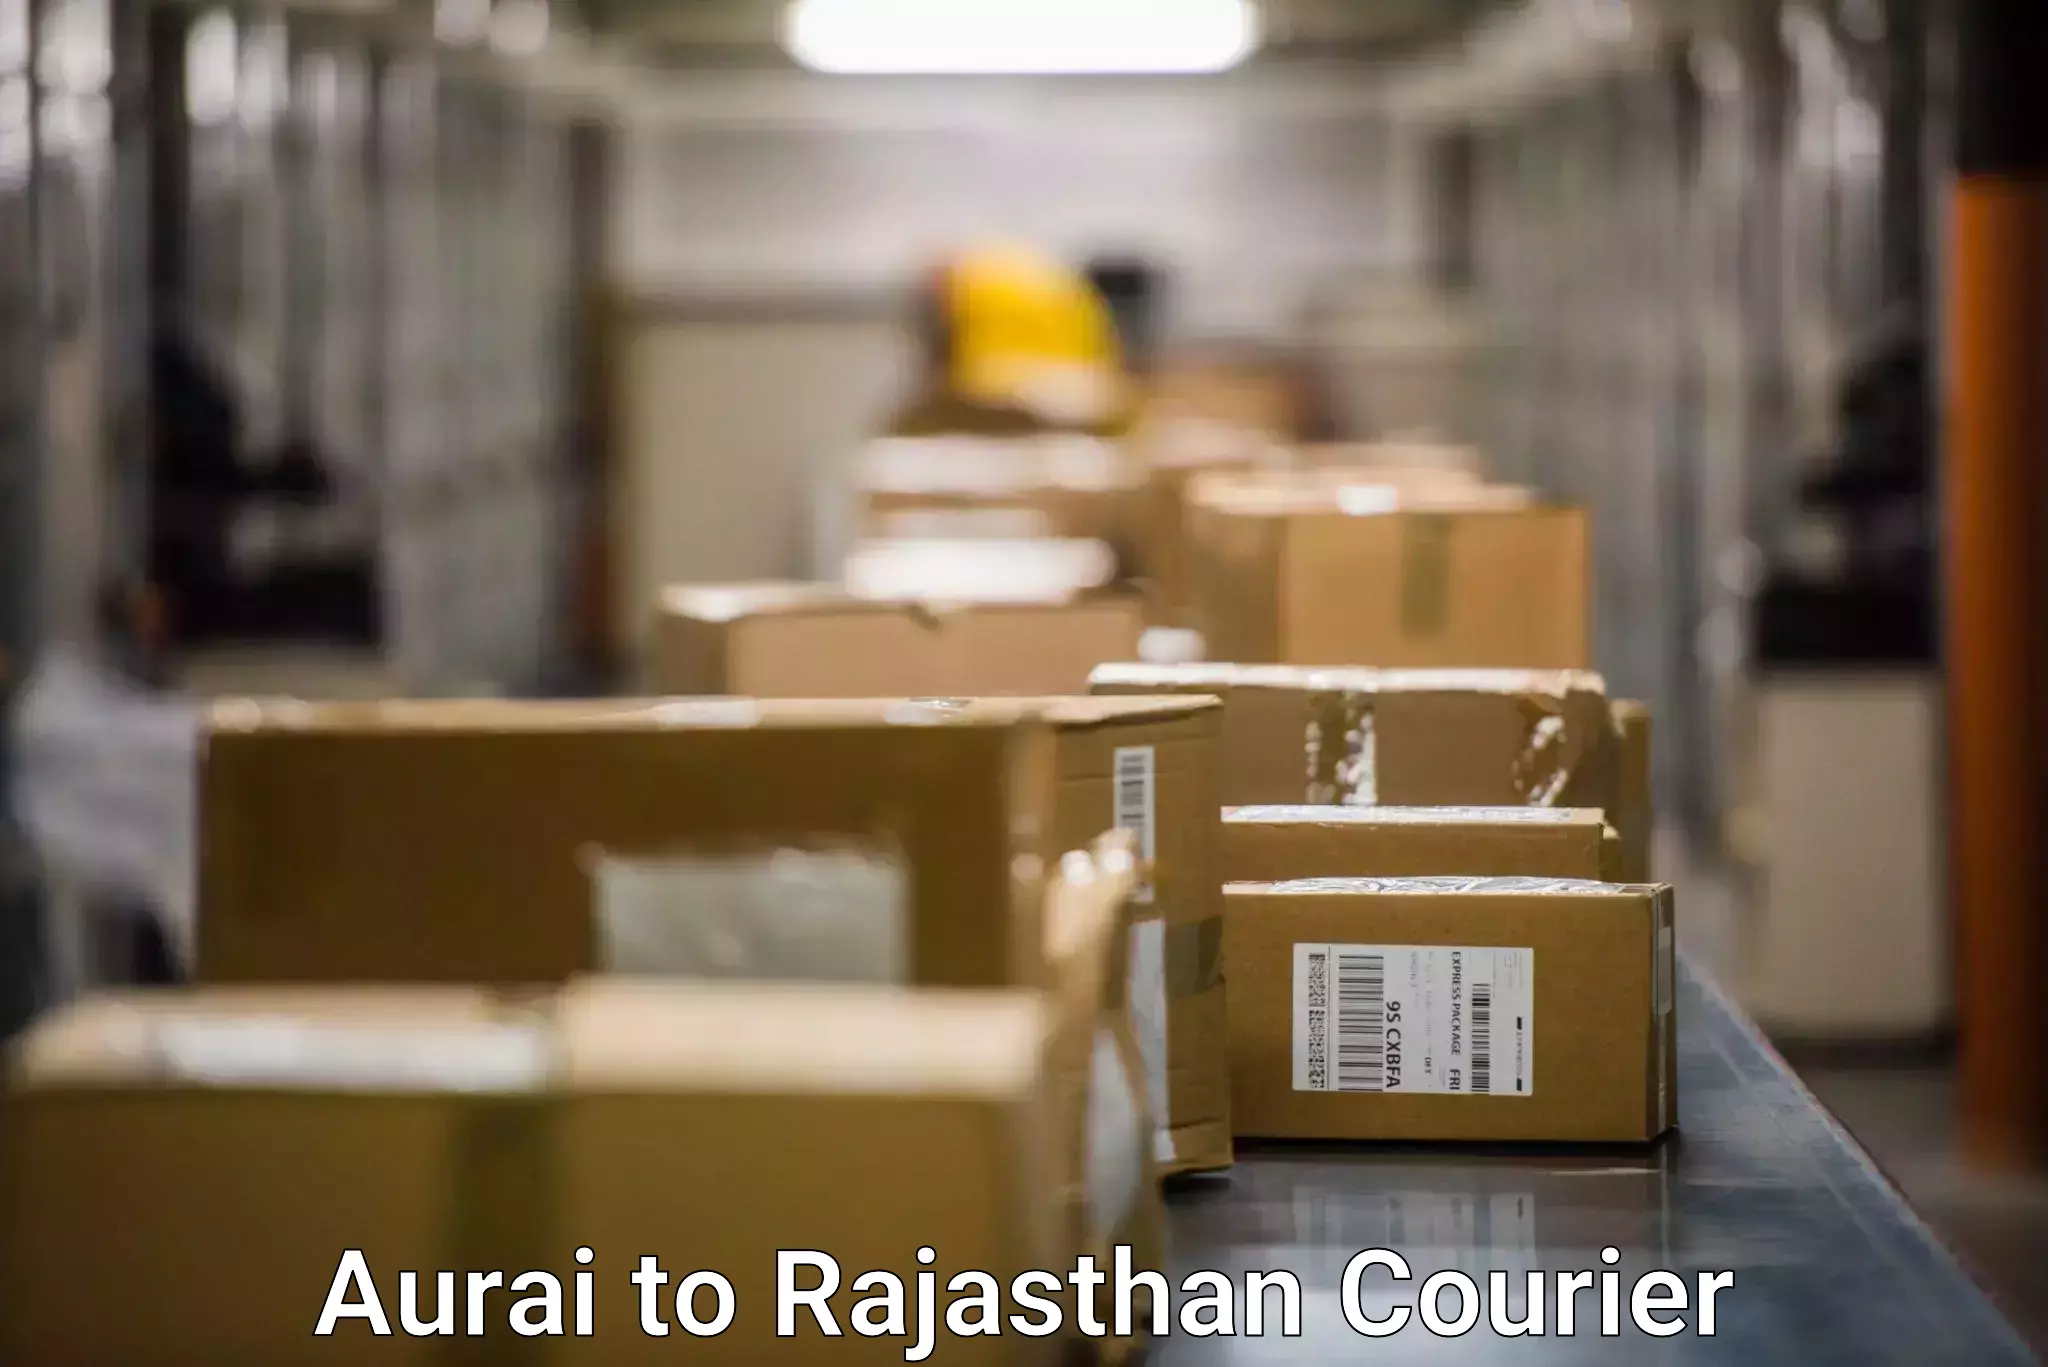 Full-service courier options Aurai to Jaipur